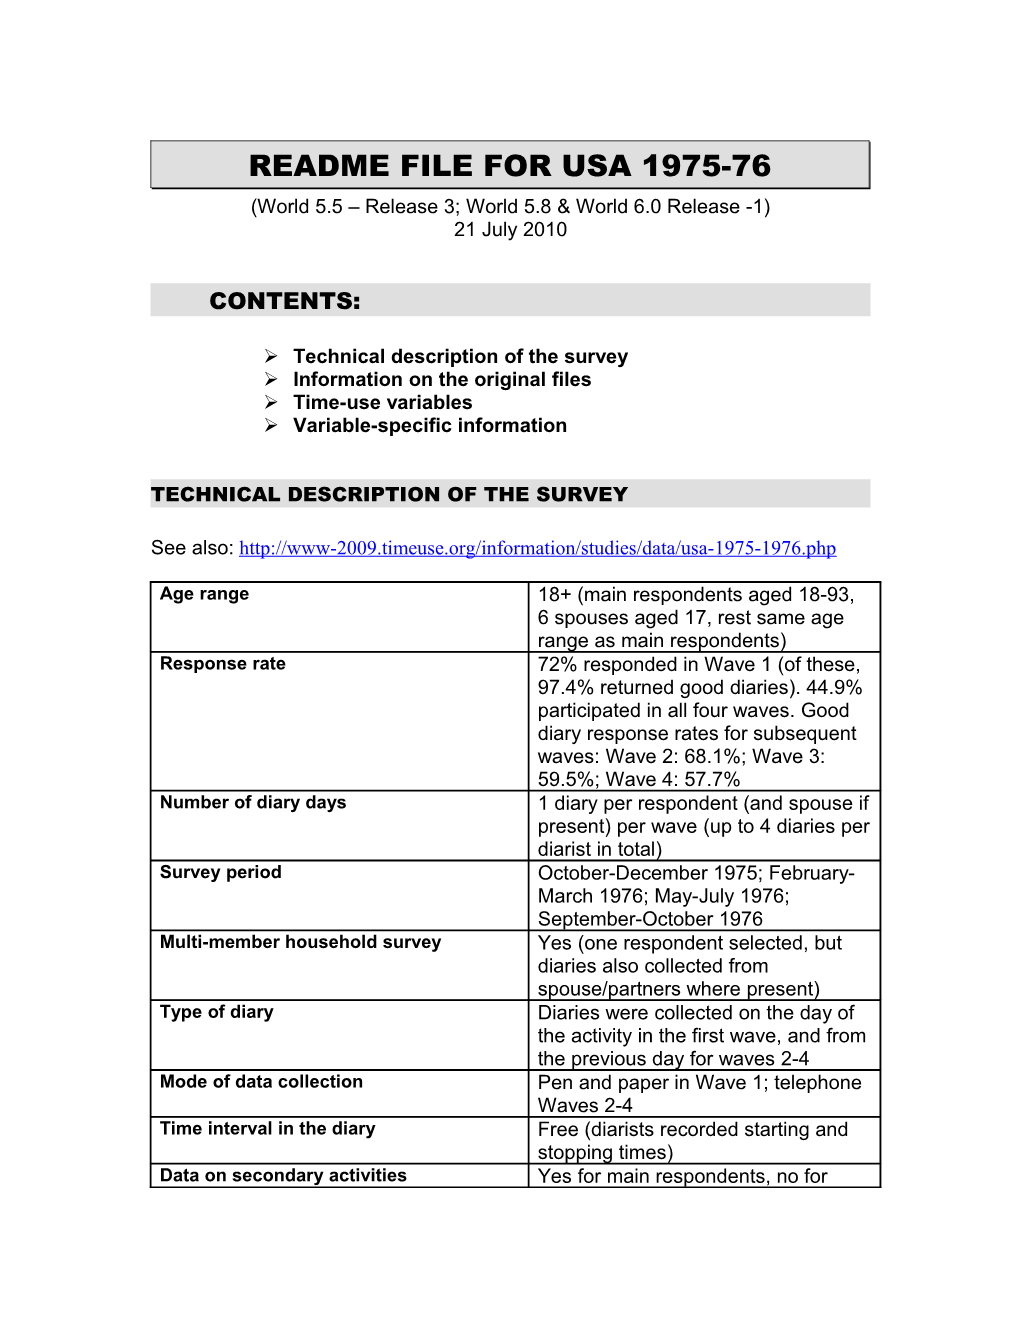 Readme File for USA 1975-76